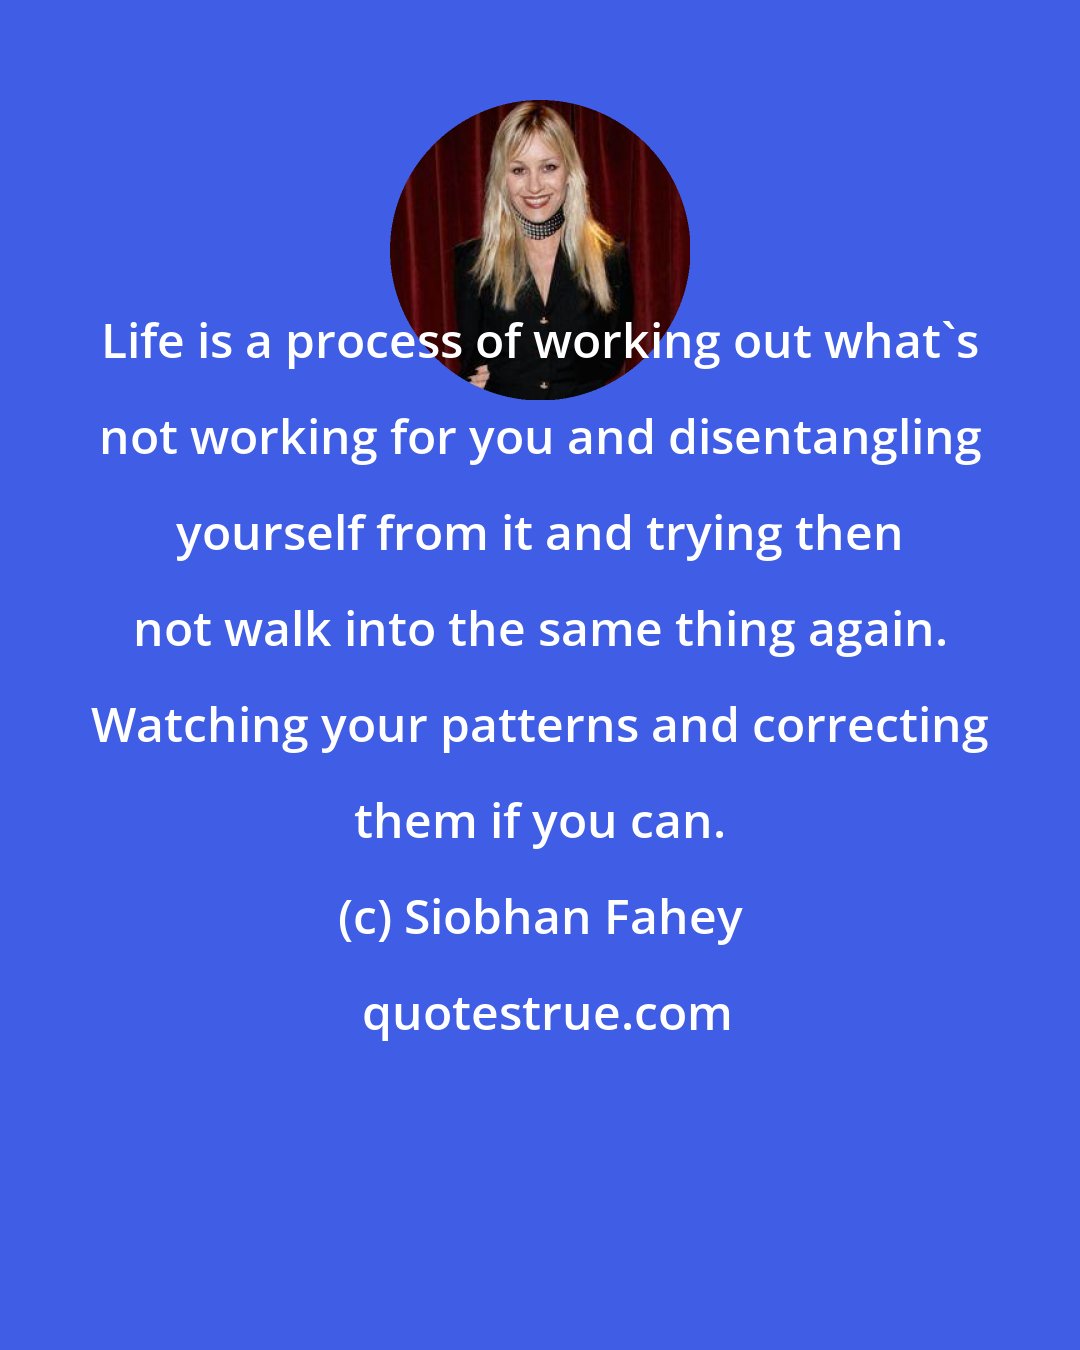 Siobhan Fahey: Life is a process of working out what's not working for you and disentangling yourself from it and trying then not walk into the same thing again. Watching your patterns and correcting them if you can.